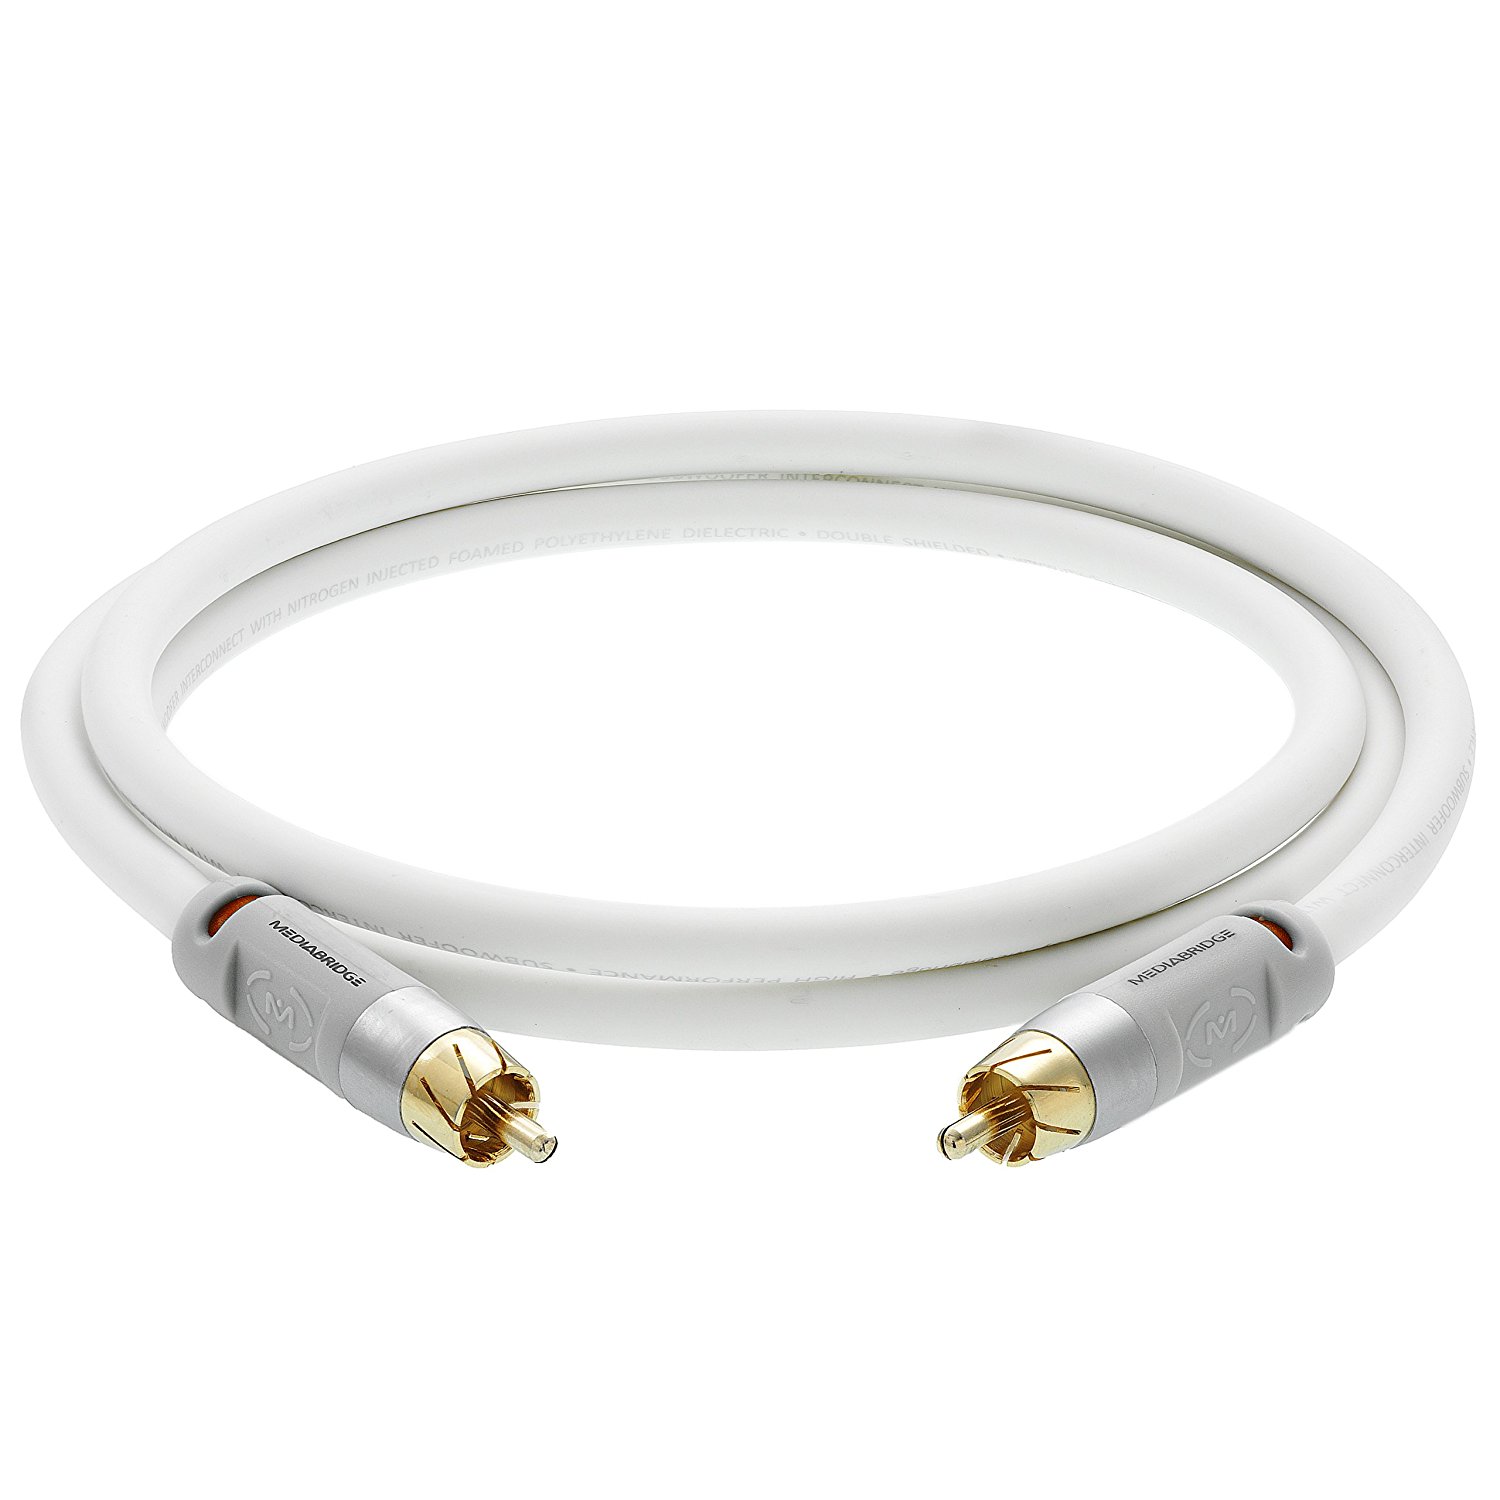 Mediabridge ULTRA Series Digital Audio Coaxial Cable (8 Feet) - Dual Shielded with RCA to RCA Gold-Plated Connectors - White - (Part# CJ08-6WR-G2 ) - image 3 of 4